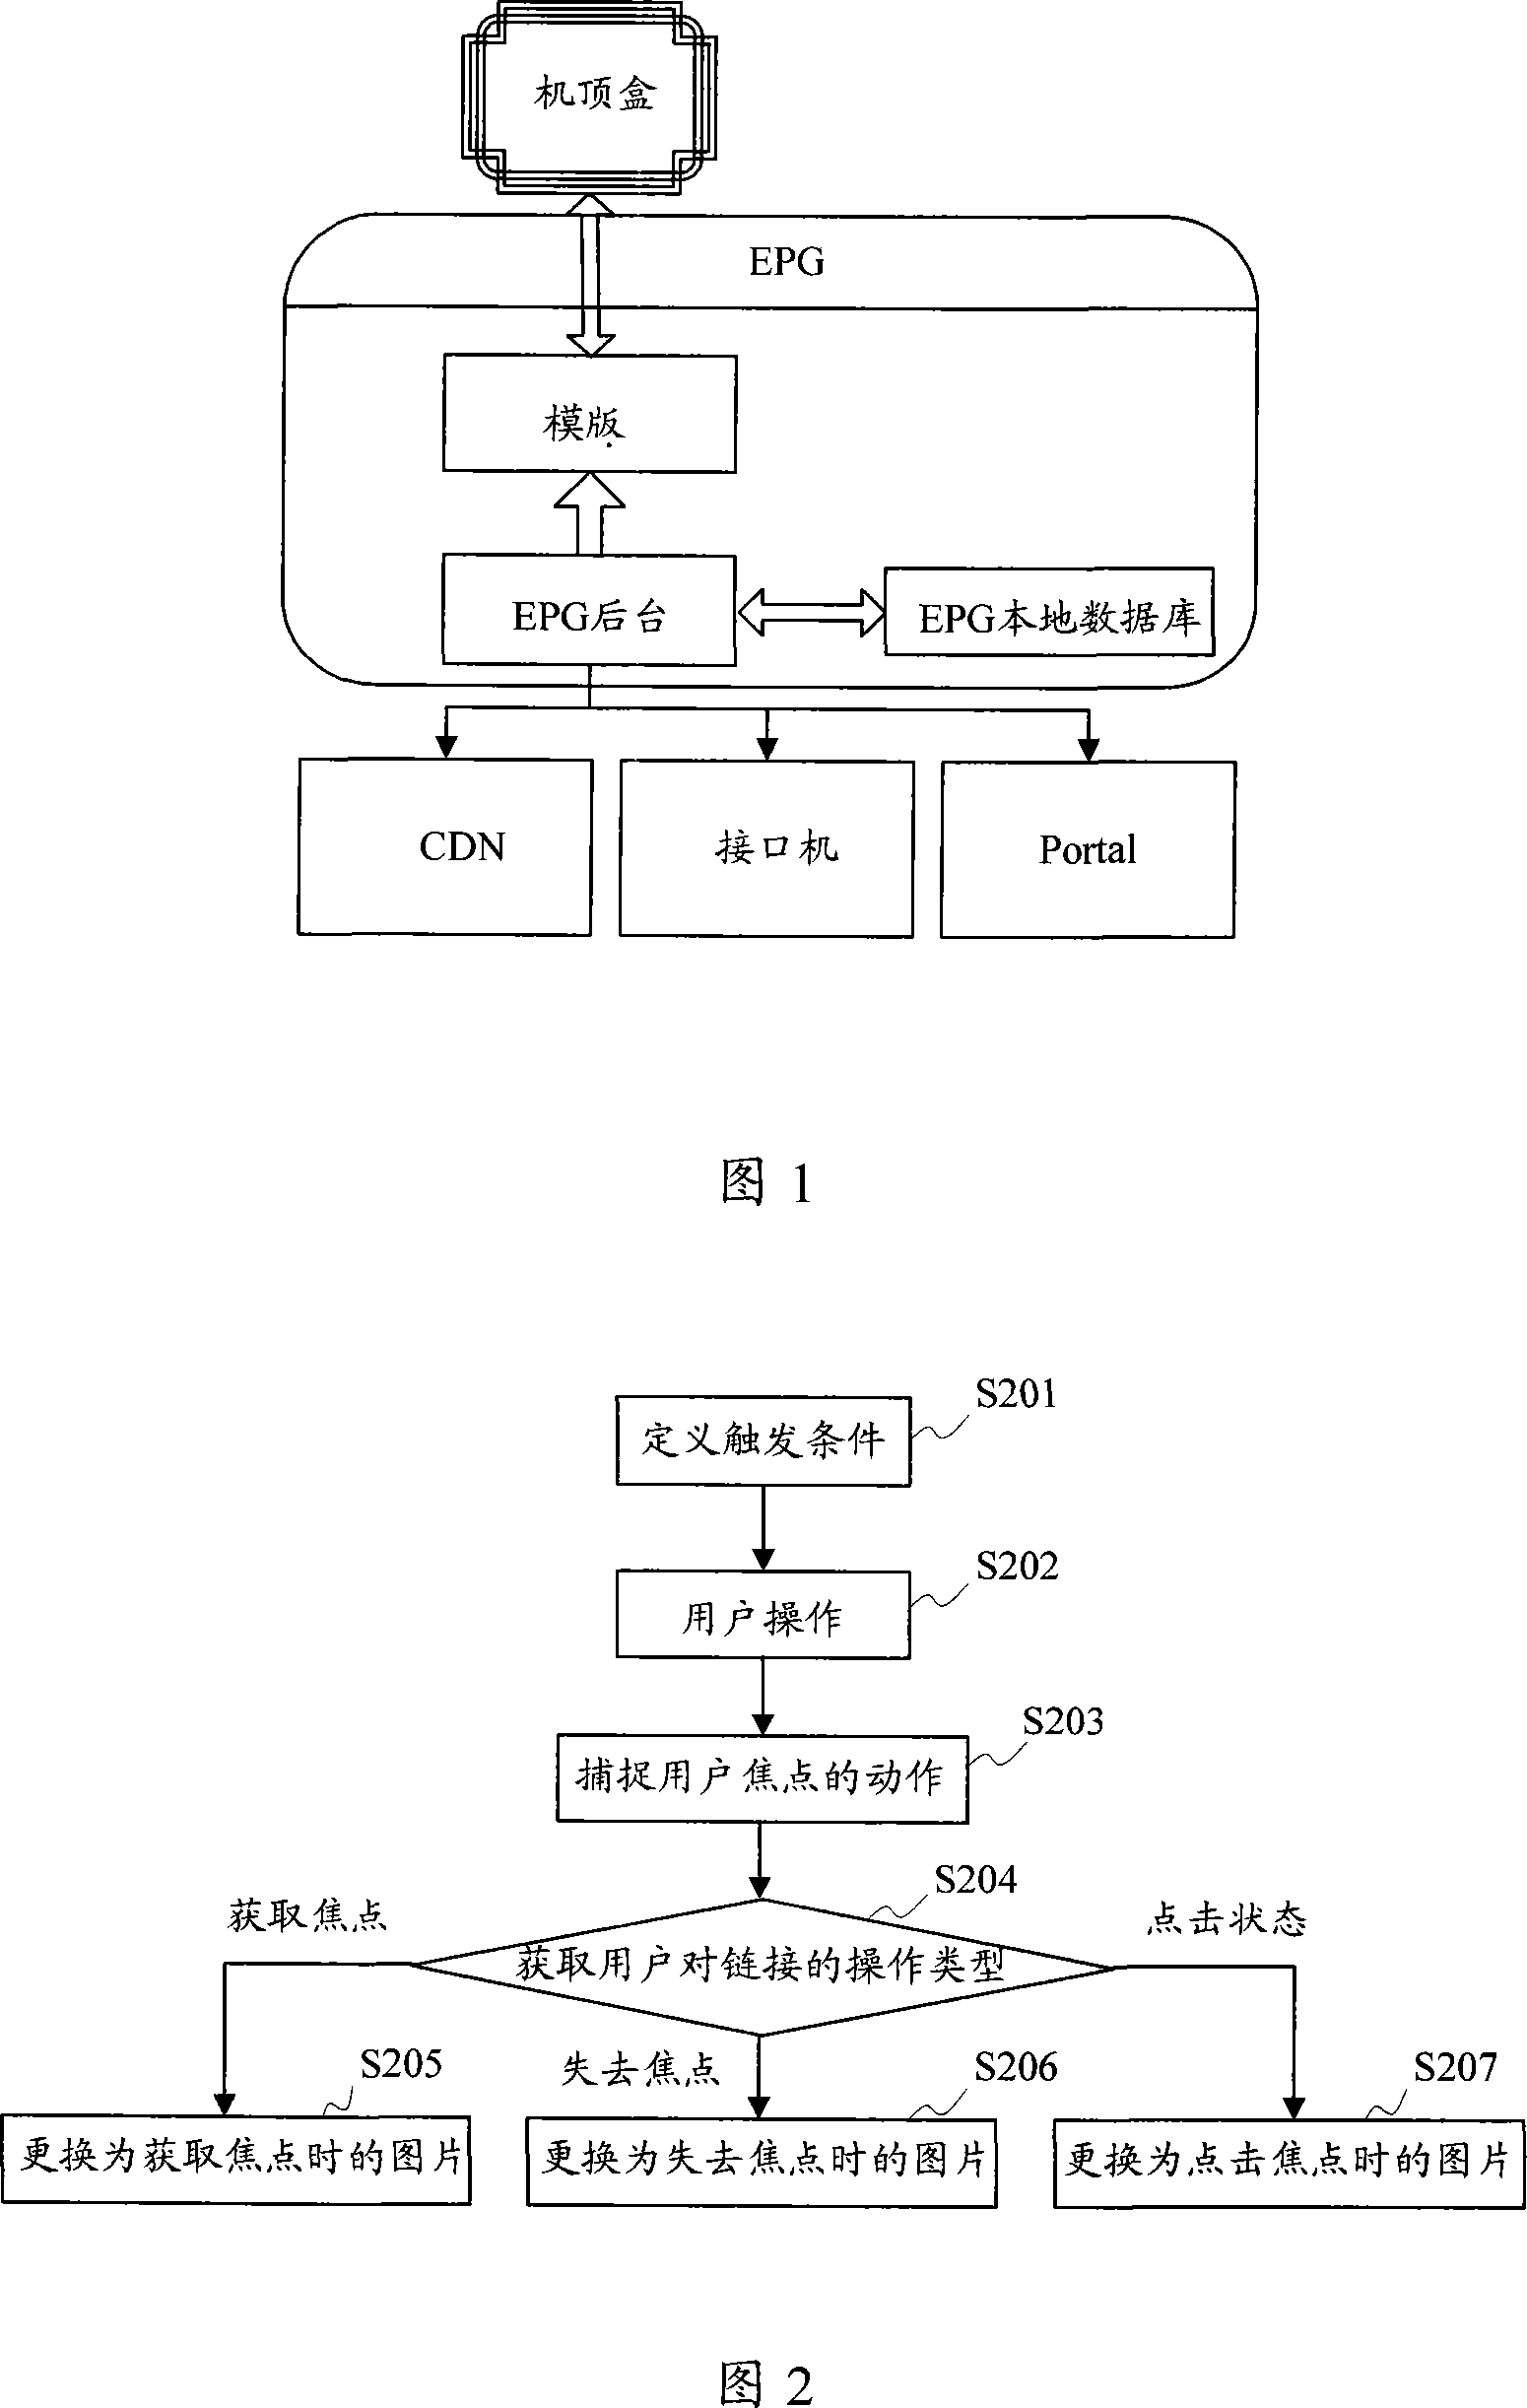 Method for implementing page dynamic effect in built-in browser of network television